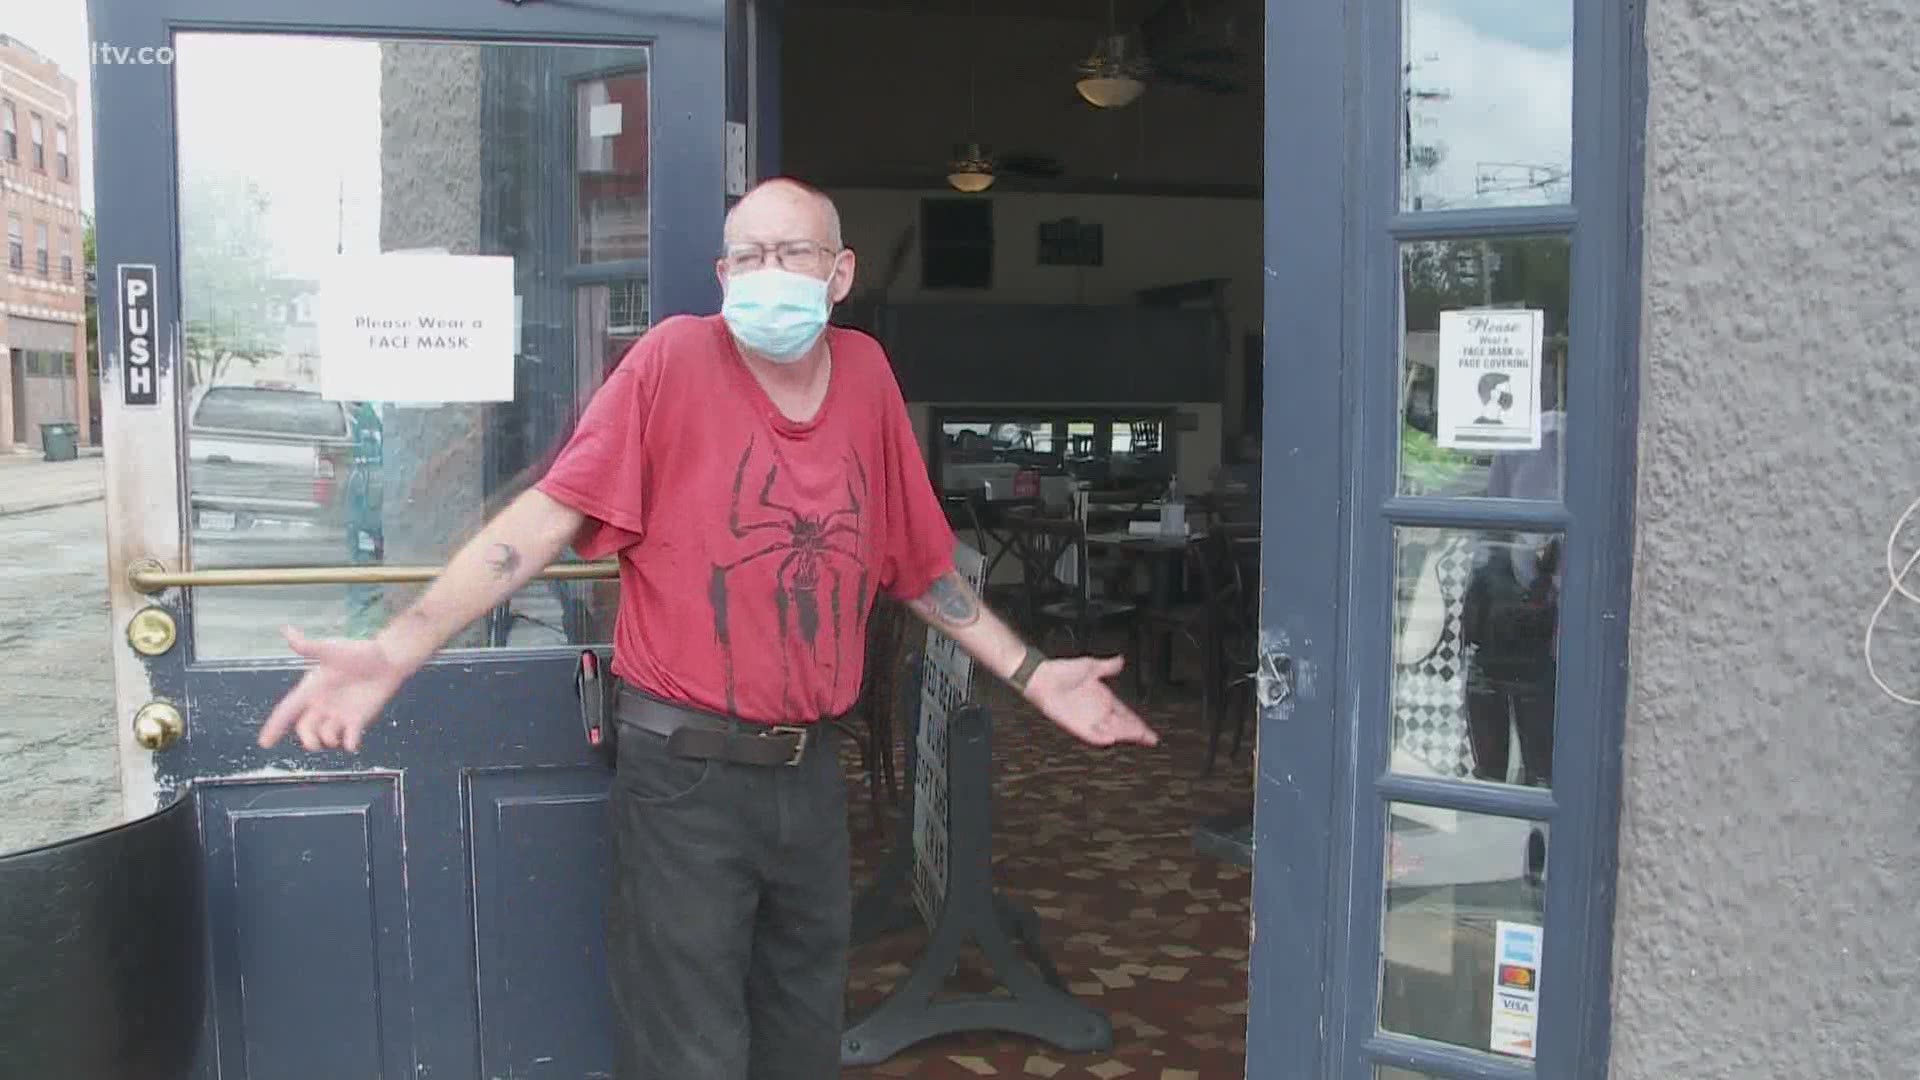 Local businesses are starting to 'hit the wall' from lack of business and customers due to the coronavirus pandemic, which is now more than a third of the year.